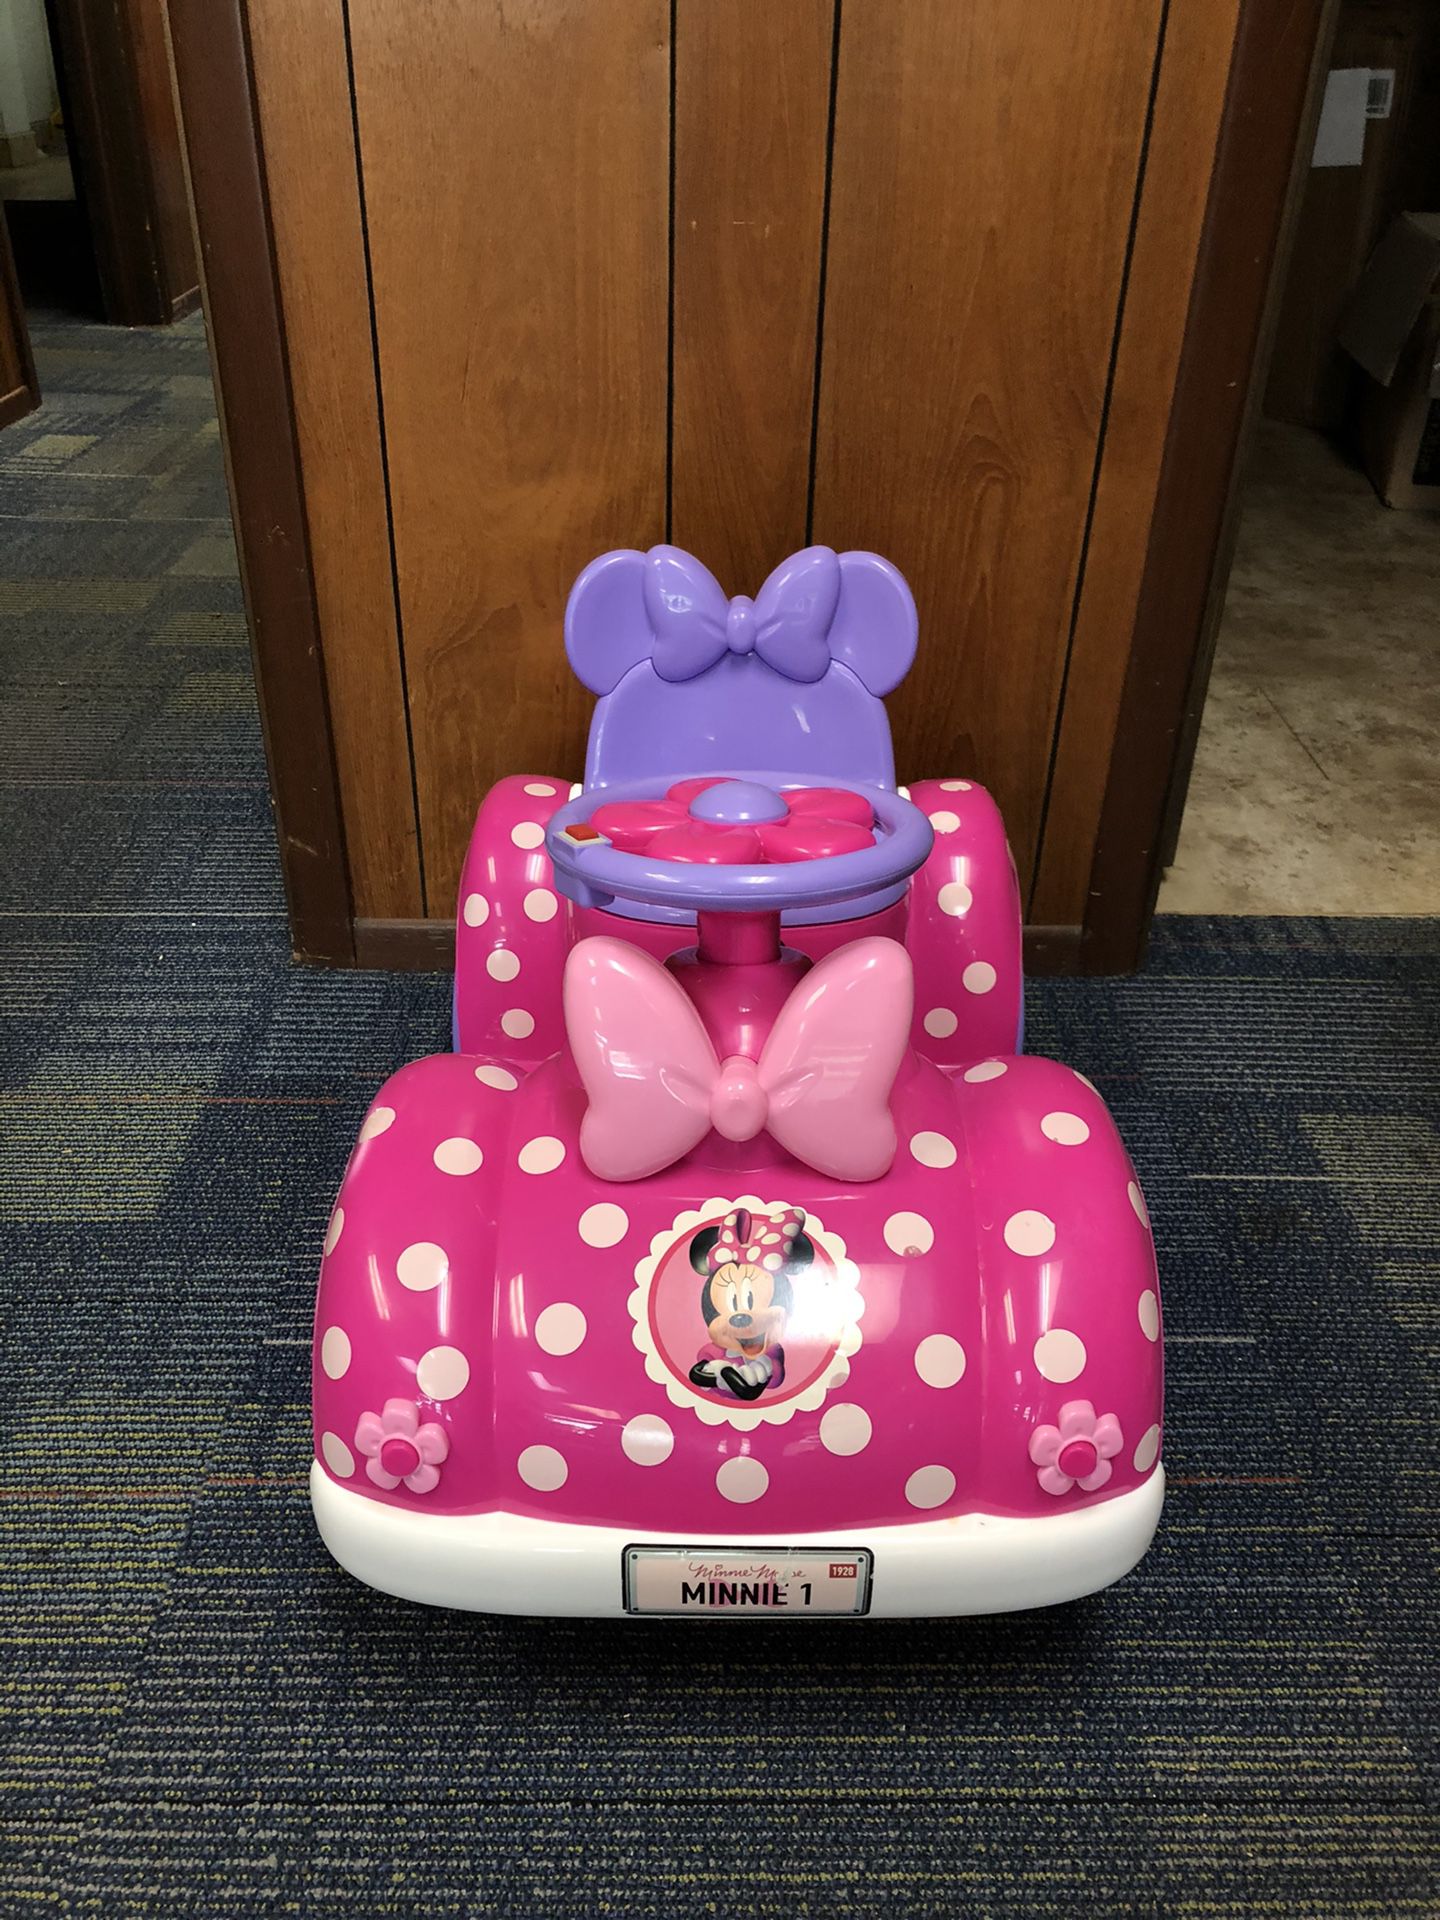 Minnie Mouse Toddler Ride on Toy Kids Car